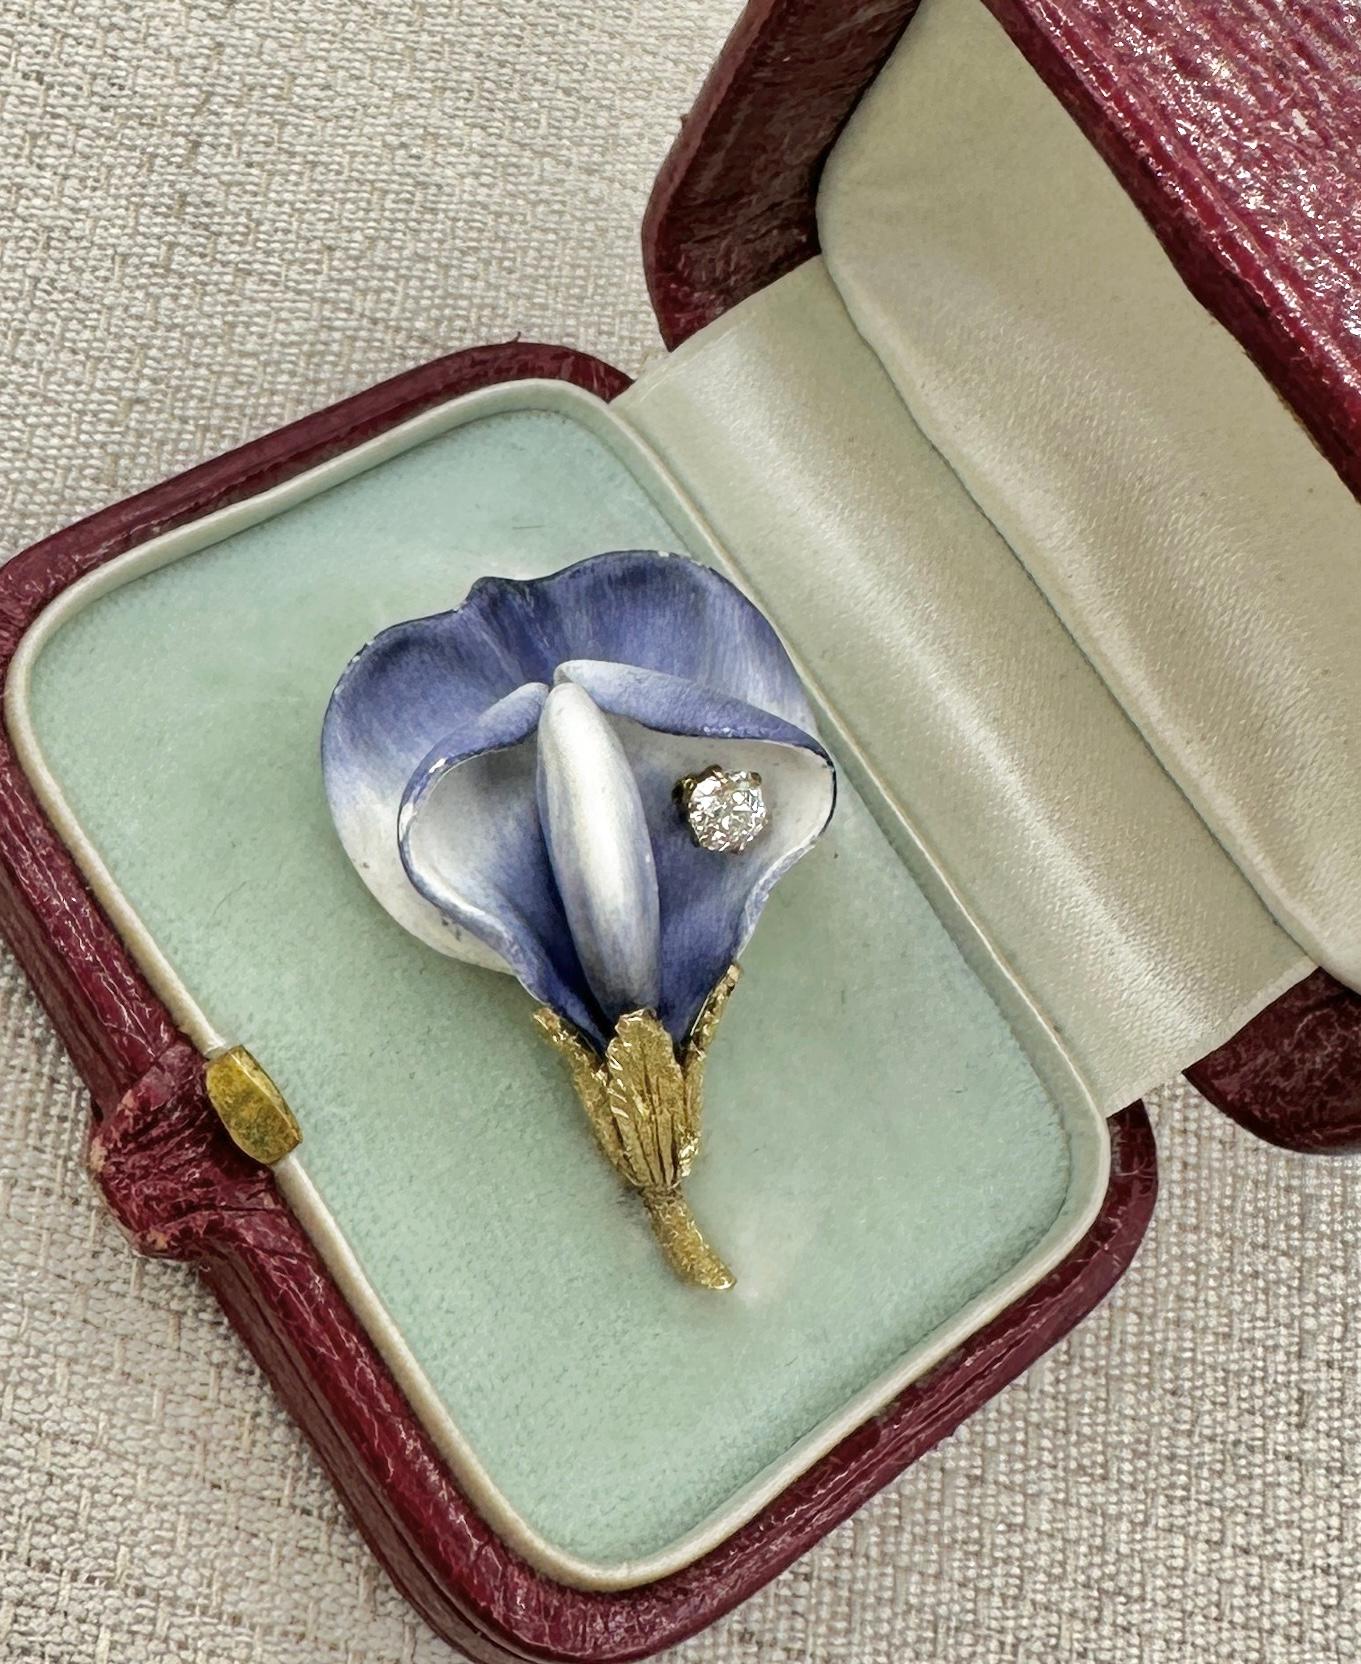 This is an extraordinary antique Old Mine Cut Diamond Enamel Flower Brooch in its Tiffany & Co. fitted box.  The magnificent fully three dimensional flower represents possibly a Calla Lily or an Orchid.  The polychrome enamel is exquisite with its